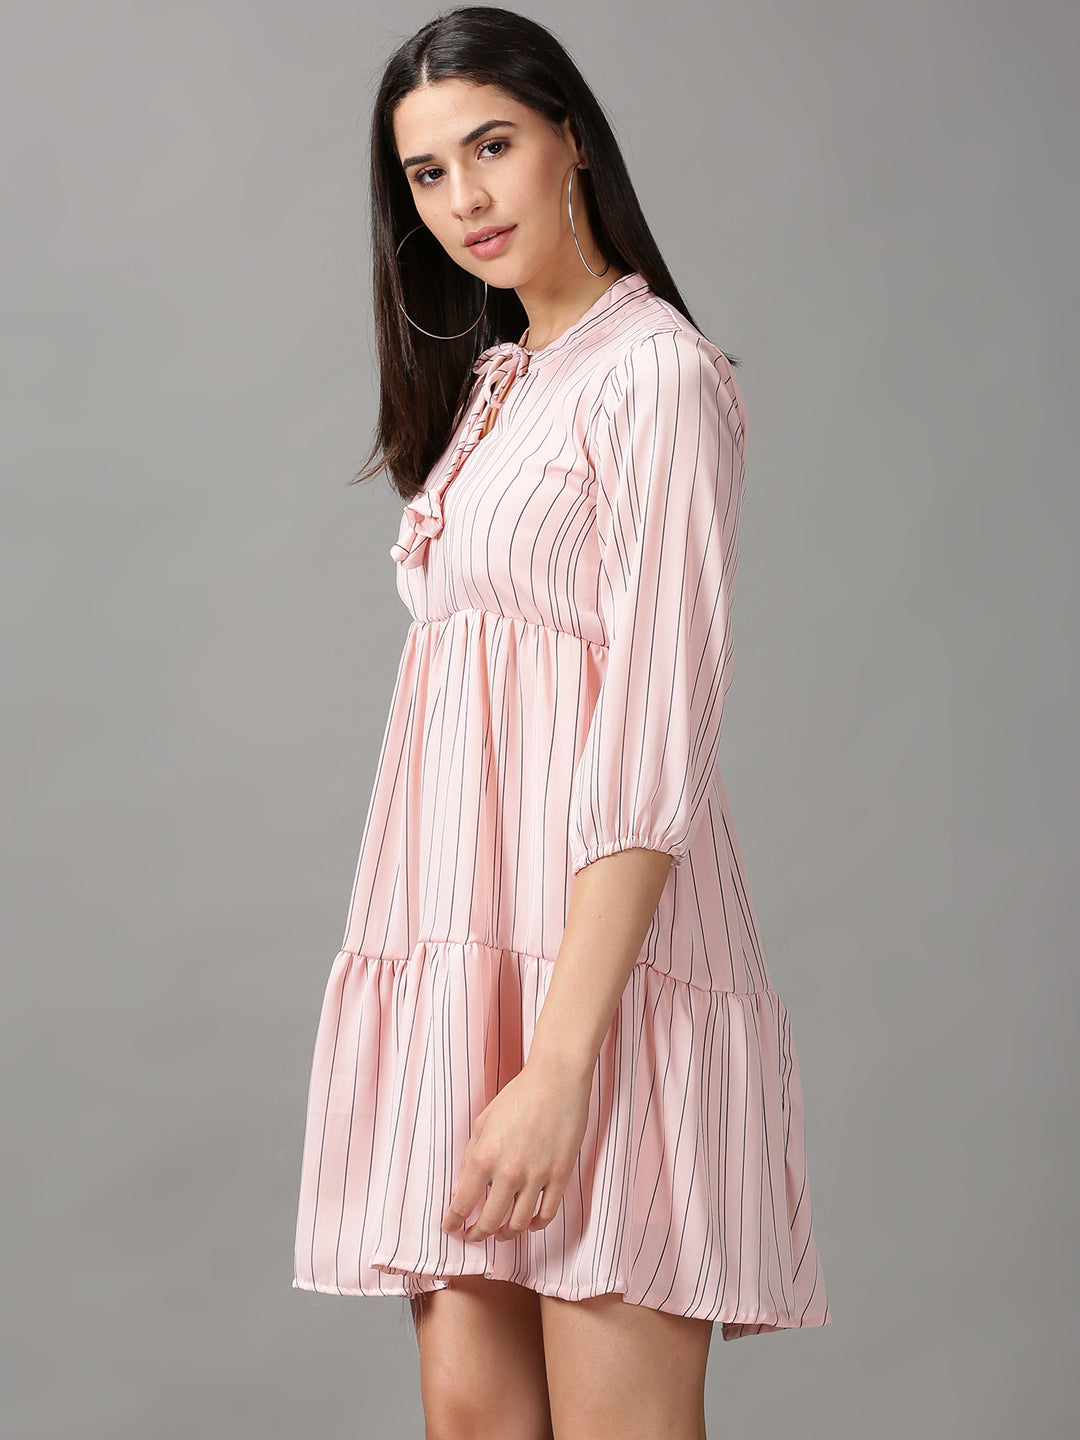 Women's Peach Striped Fit and Flare Dress